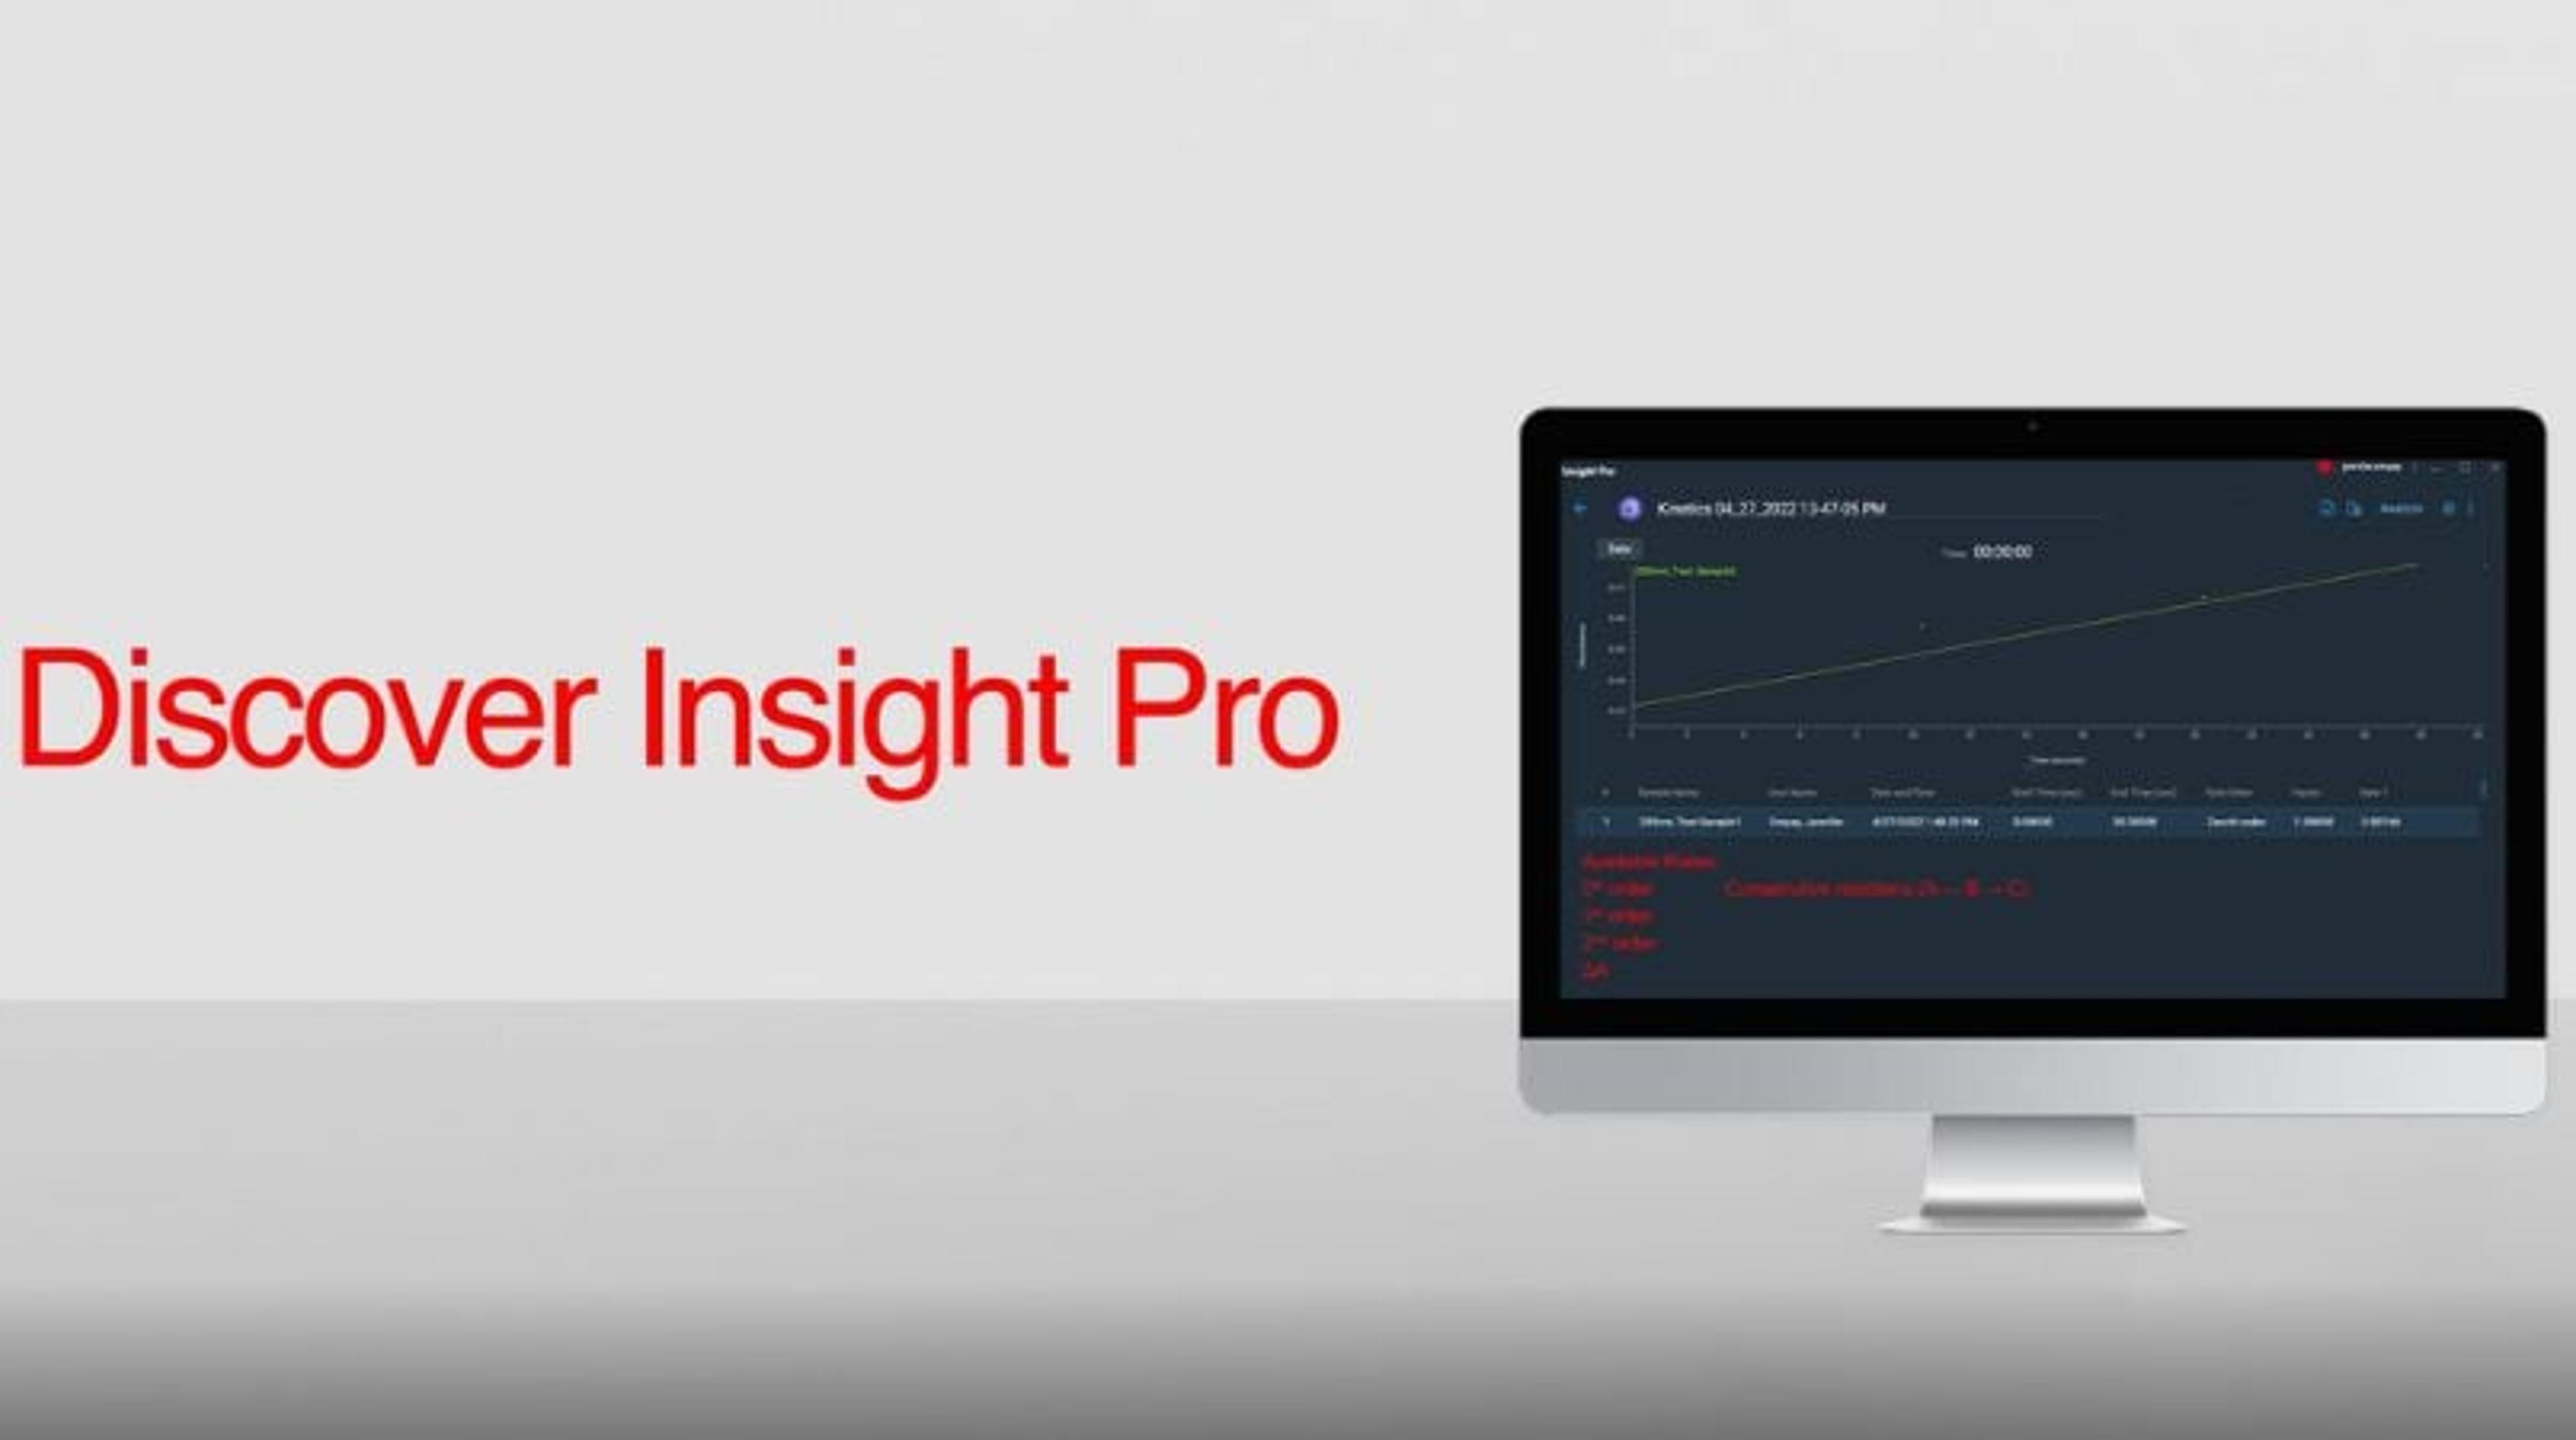 Discover the Insight Pro software for Evolution UV-visible spectrophotometers